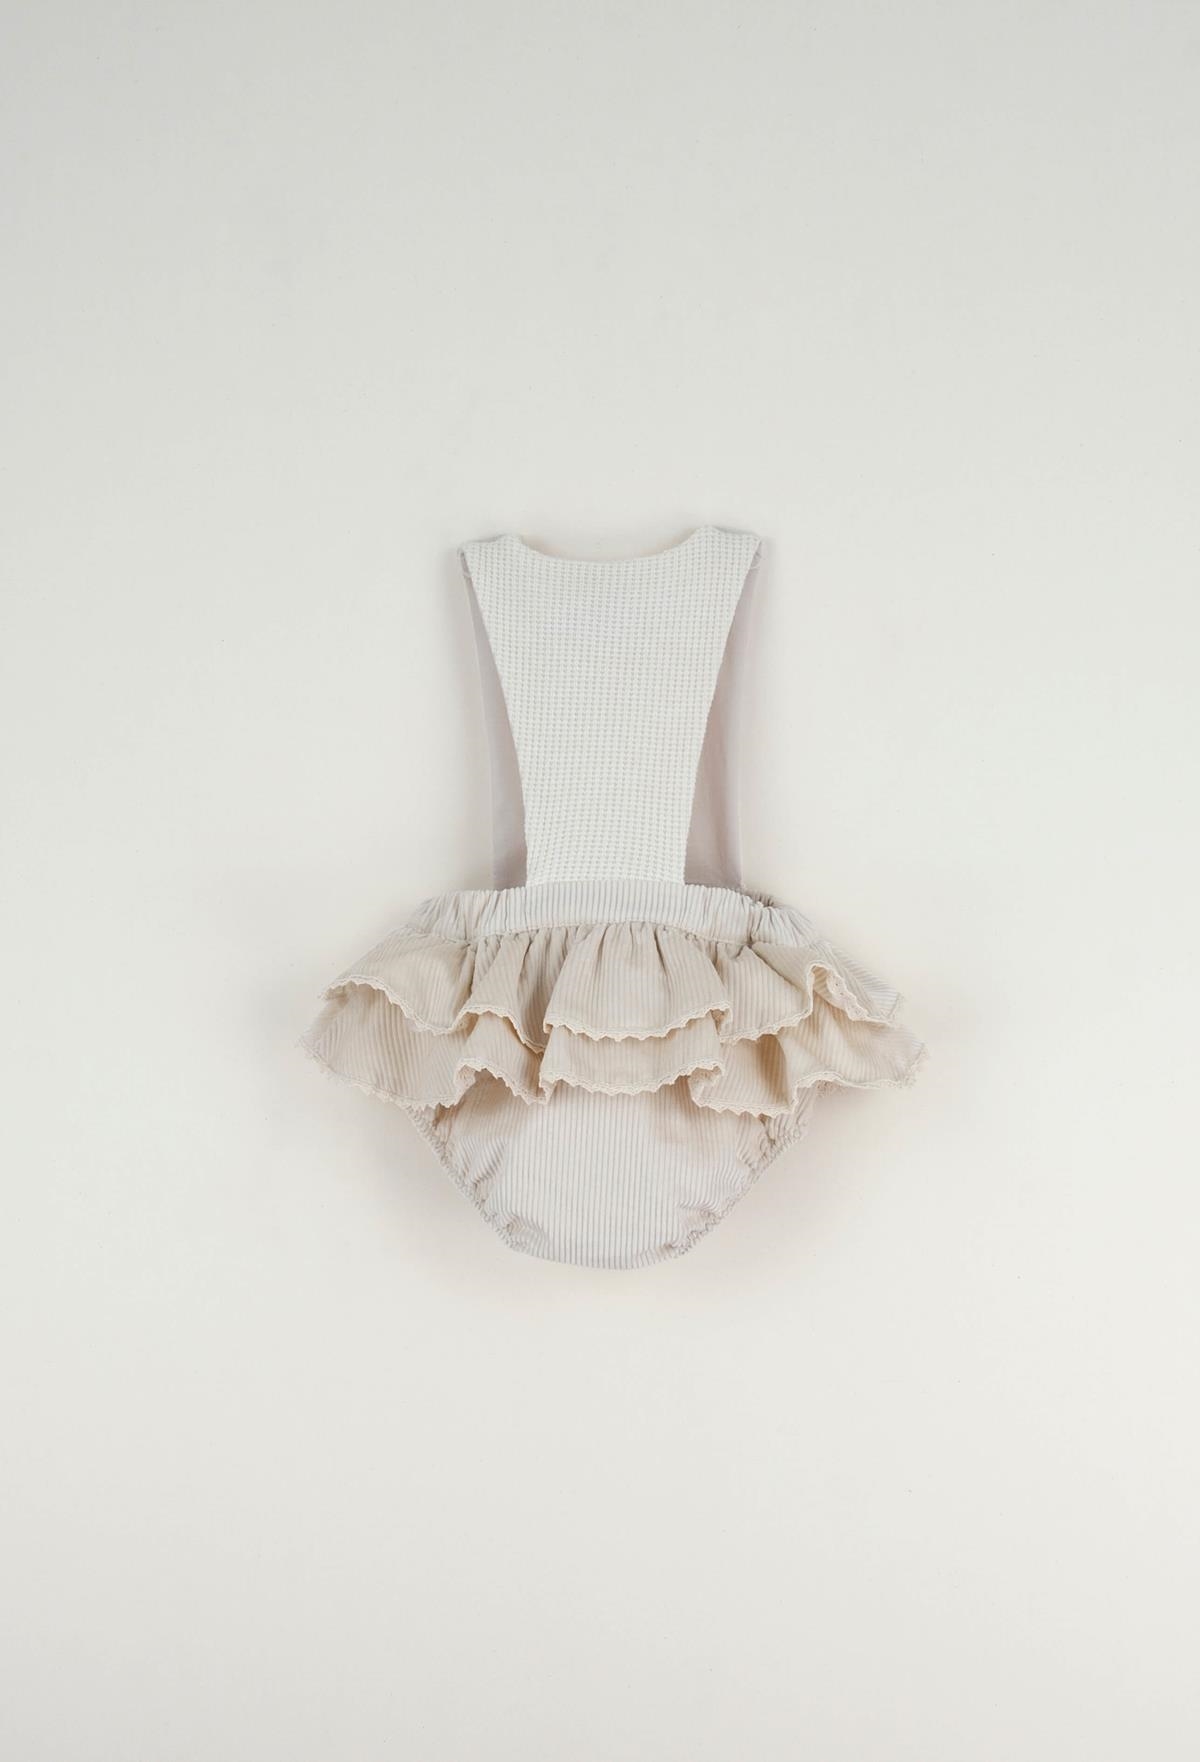 Mod.1.1 Off-white frilled romper suit with bib | AW22.23 Mod.1.1 Off-white frilled romper suit with bib